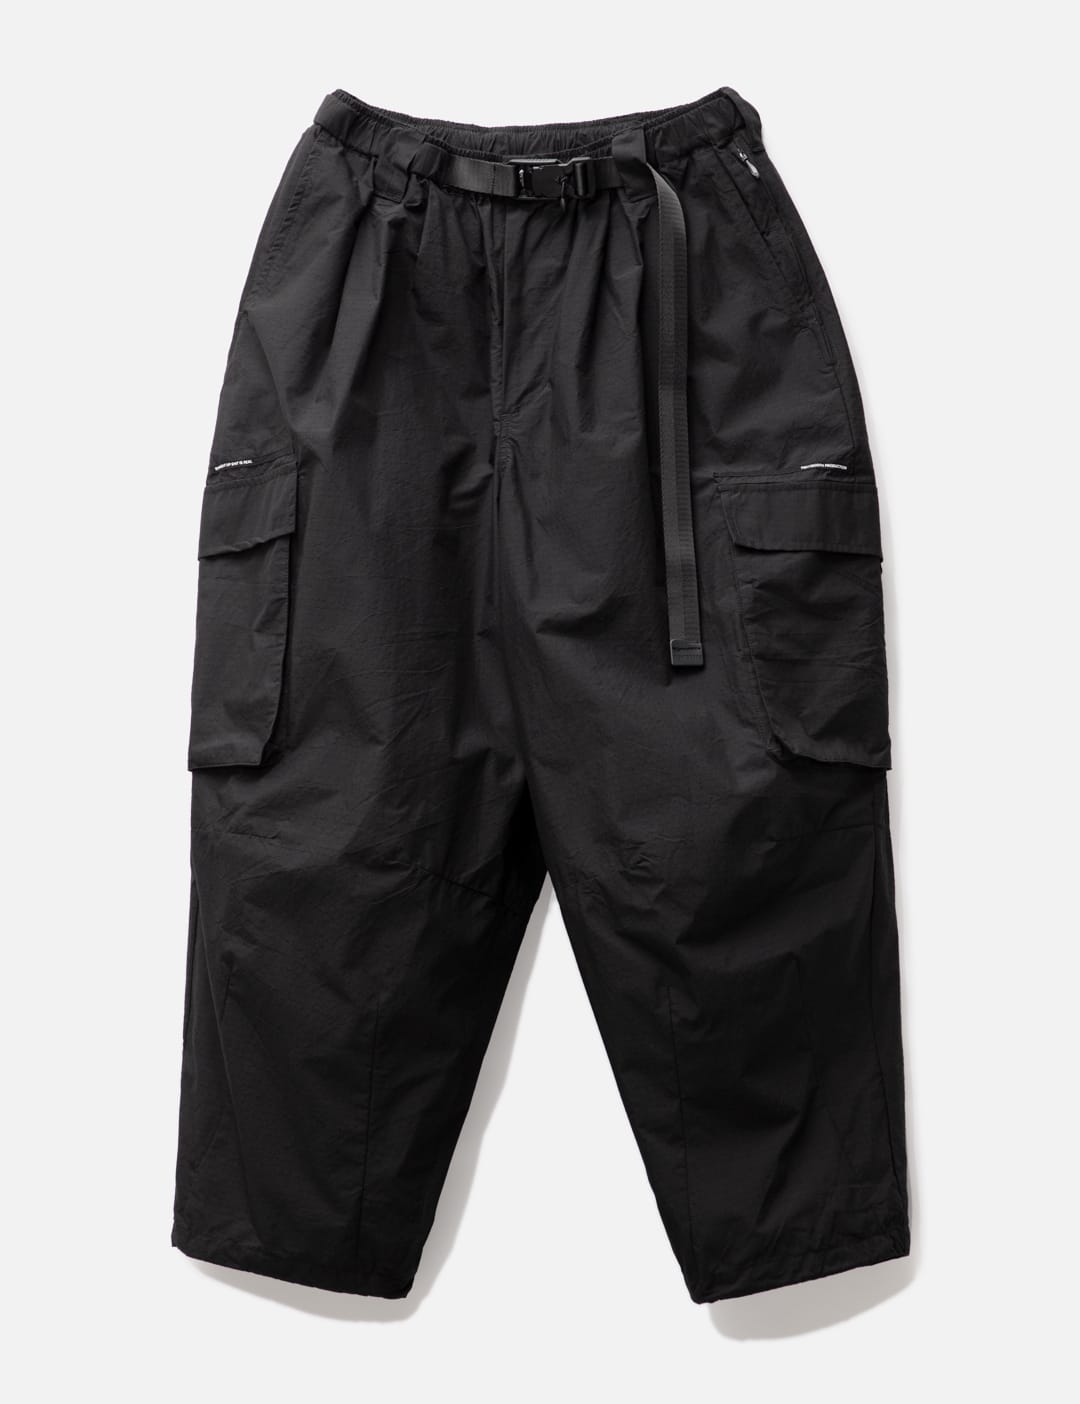 TIGHTBOOTH   RIPSTOP BALLOON CARGO PANTS   HBX   Globally Curated